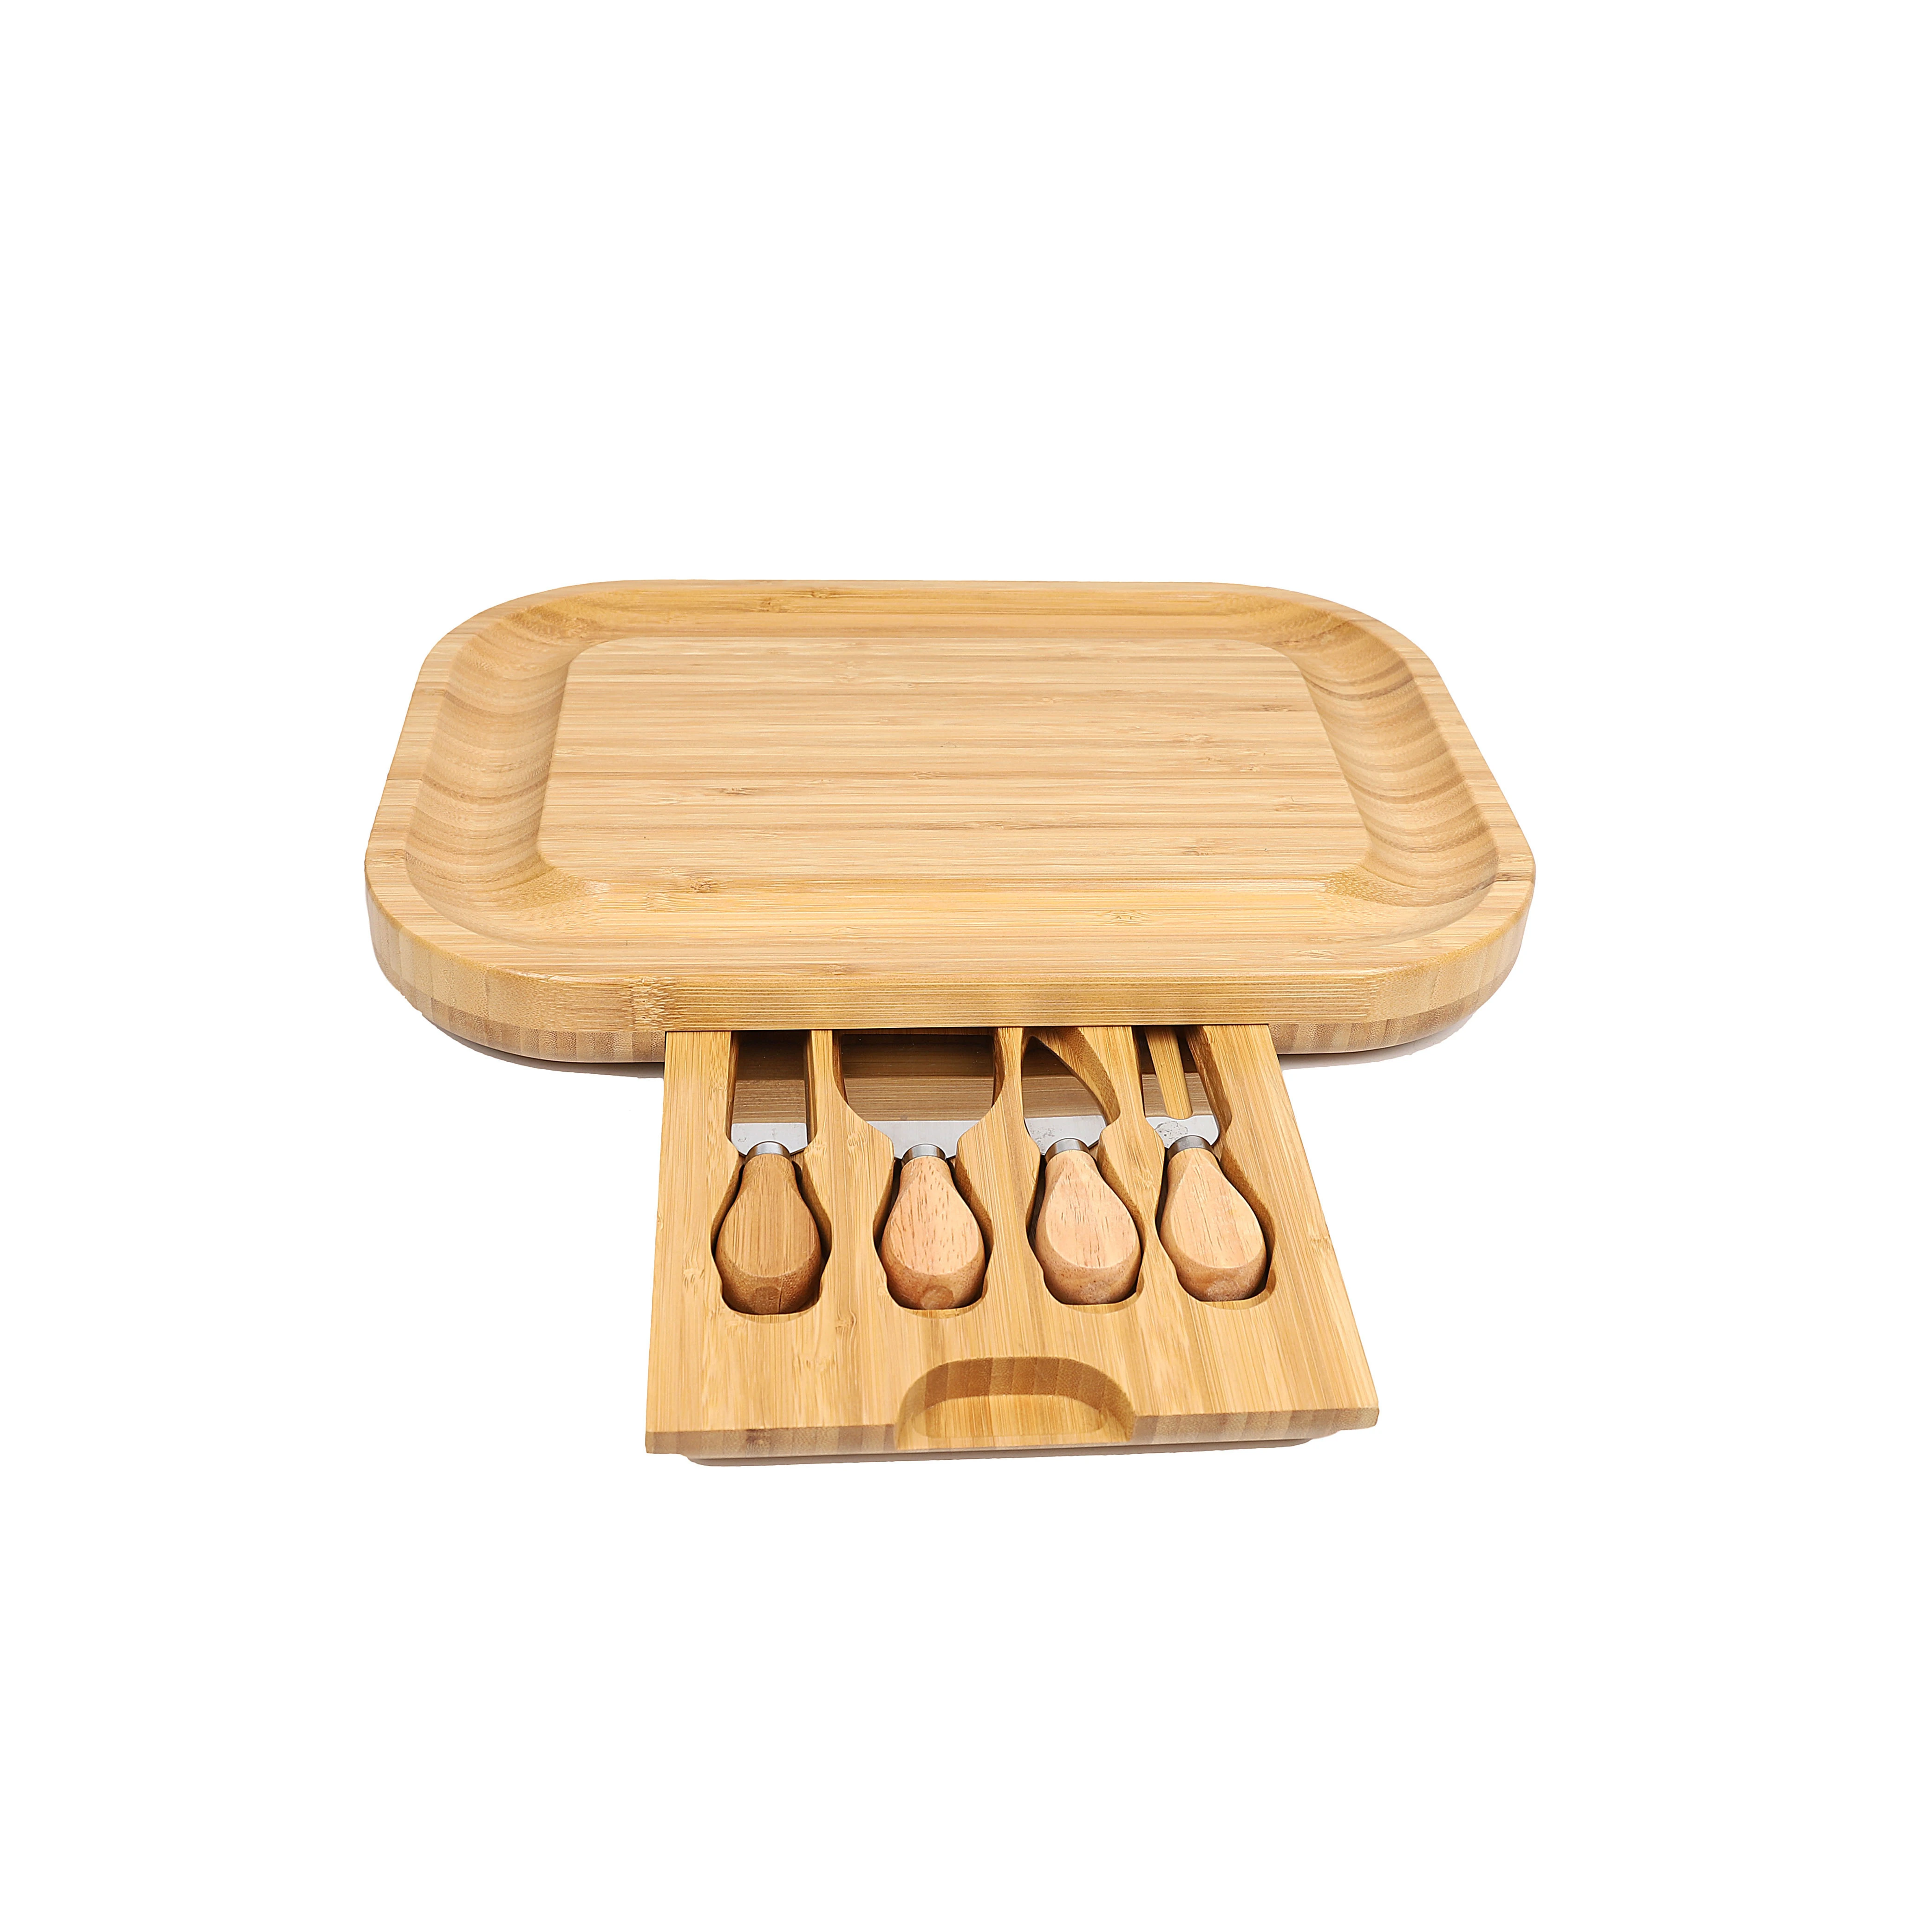 Bamboo Cheese Cutting Board Wooden Serving Tray Charcuterie Platter with Slide Out Drawer and 4 Cheese Knives